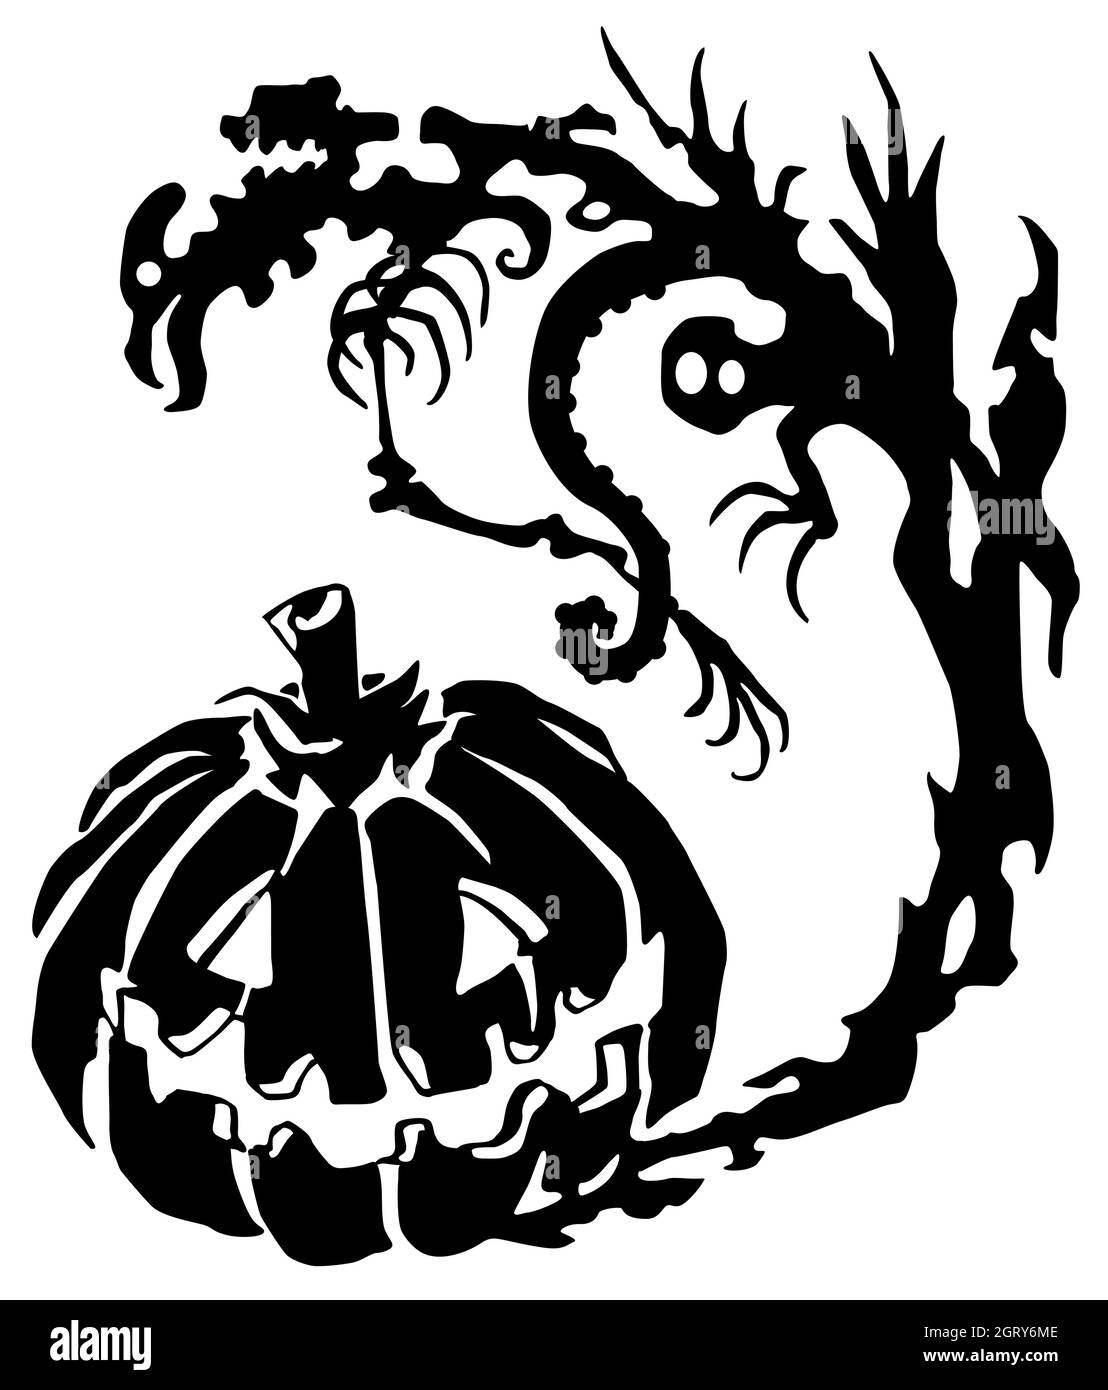 Halloween pumpkin stencil black and white stock photos images